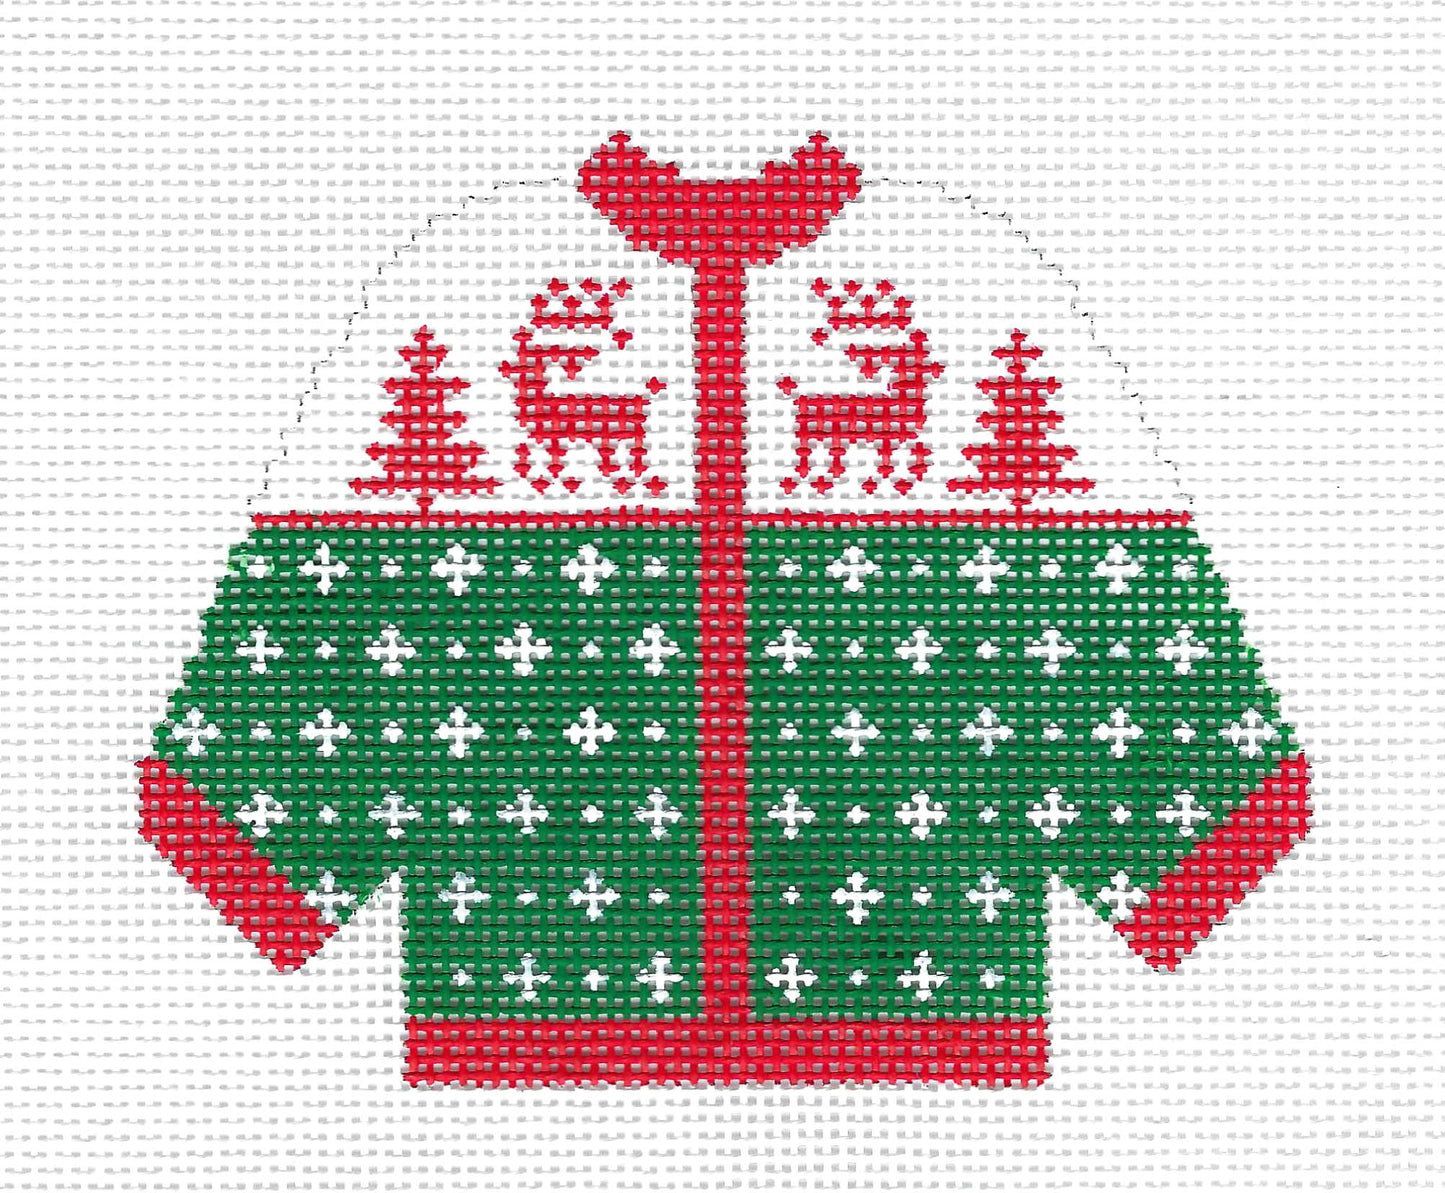 Sweater ~ 2 Reindeer in Red KNITTED CARDIGAN SWEATER handpainted Needlepoint Canvas Silver Needle